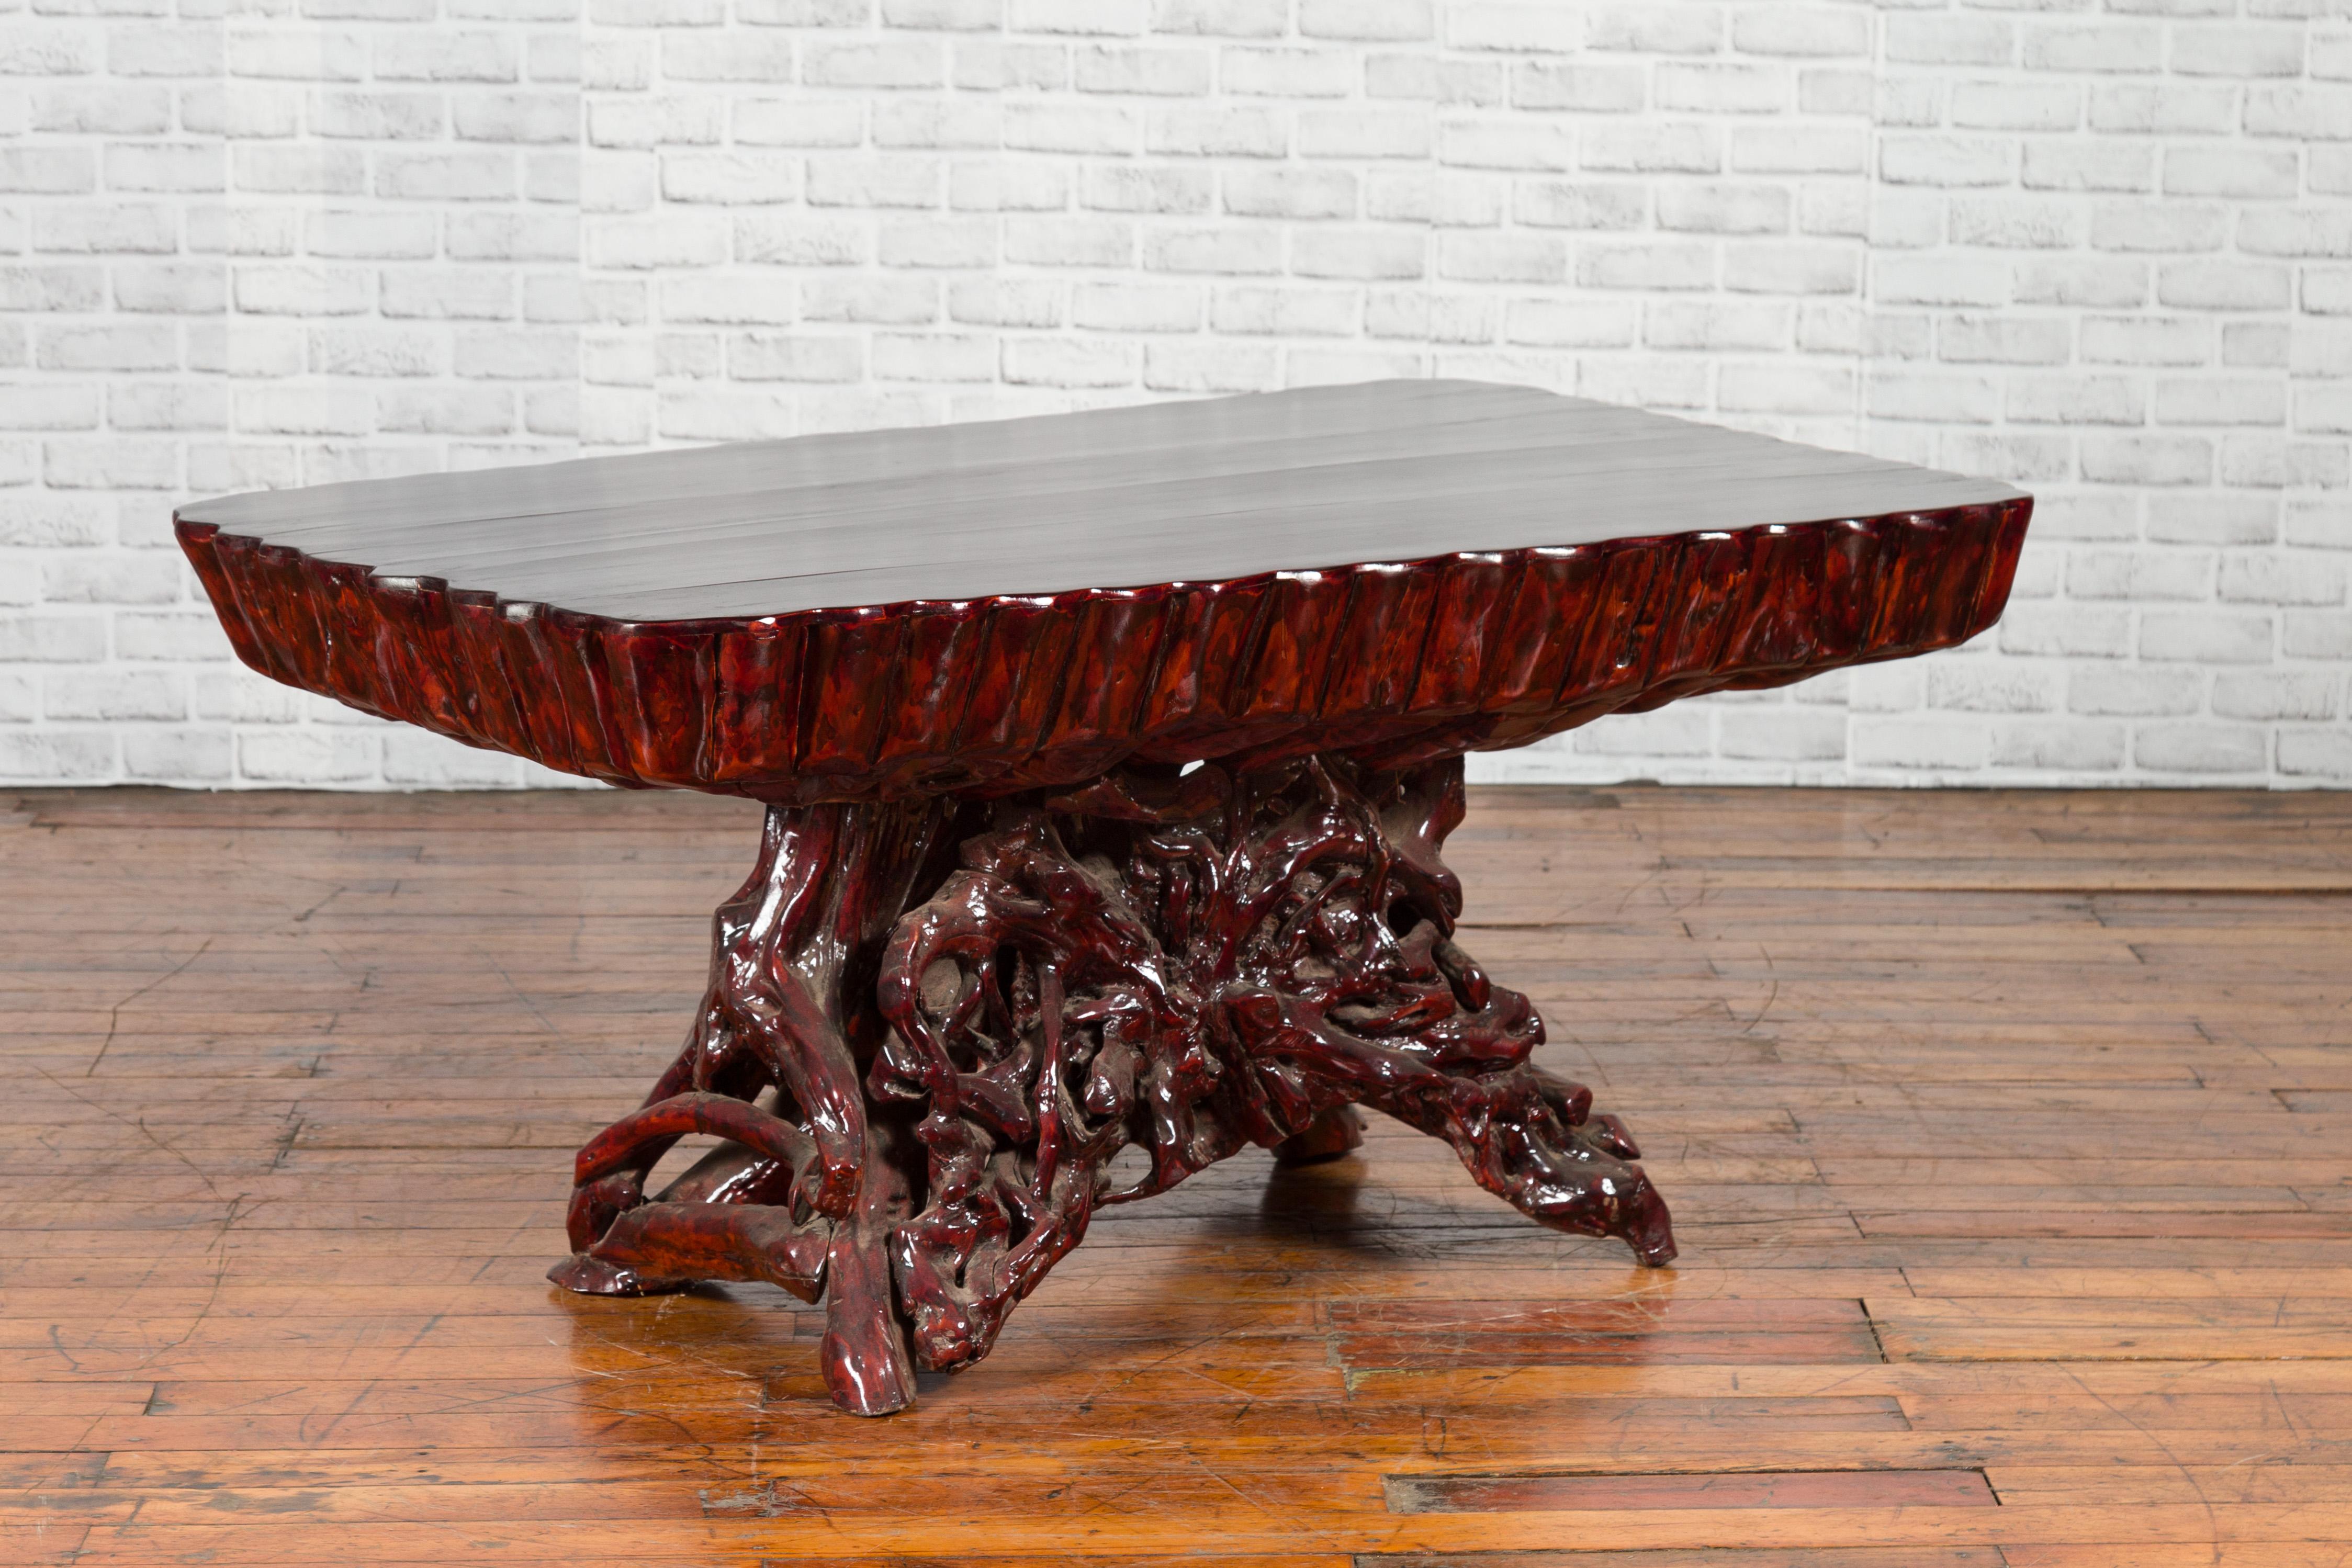 A Chinese coffee table from the late 20th century, hand carved out of one complete azalea root. Created in China during the later years of the 20th century, this striking coffee table was hand carved from a single azalea root and lacquered to its